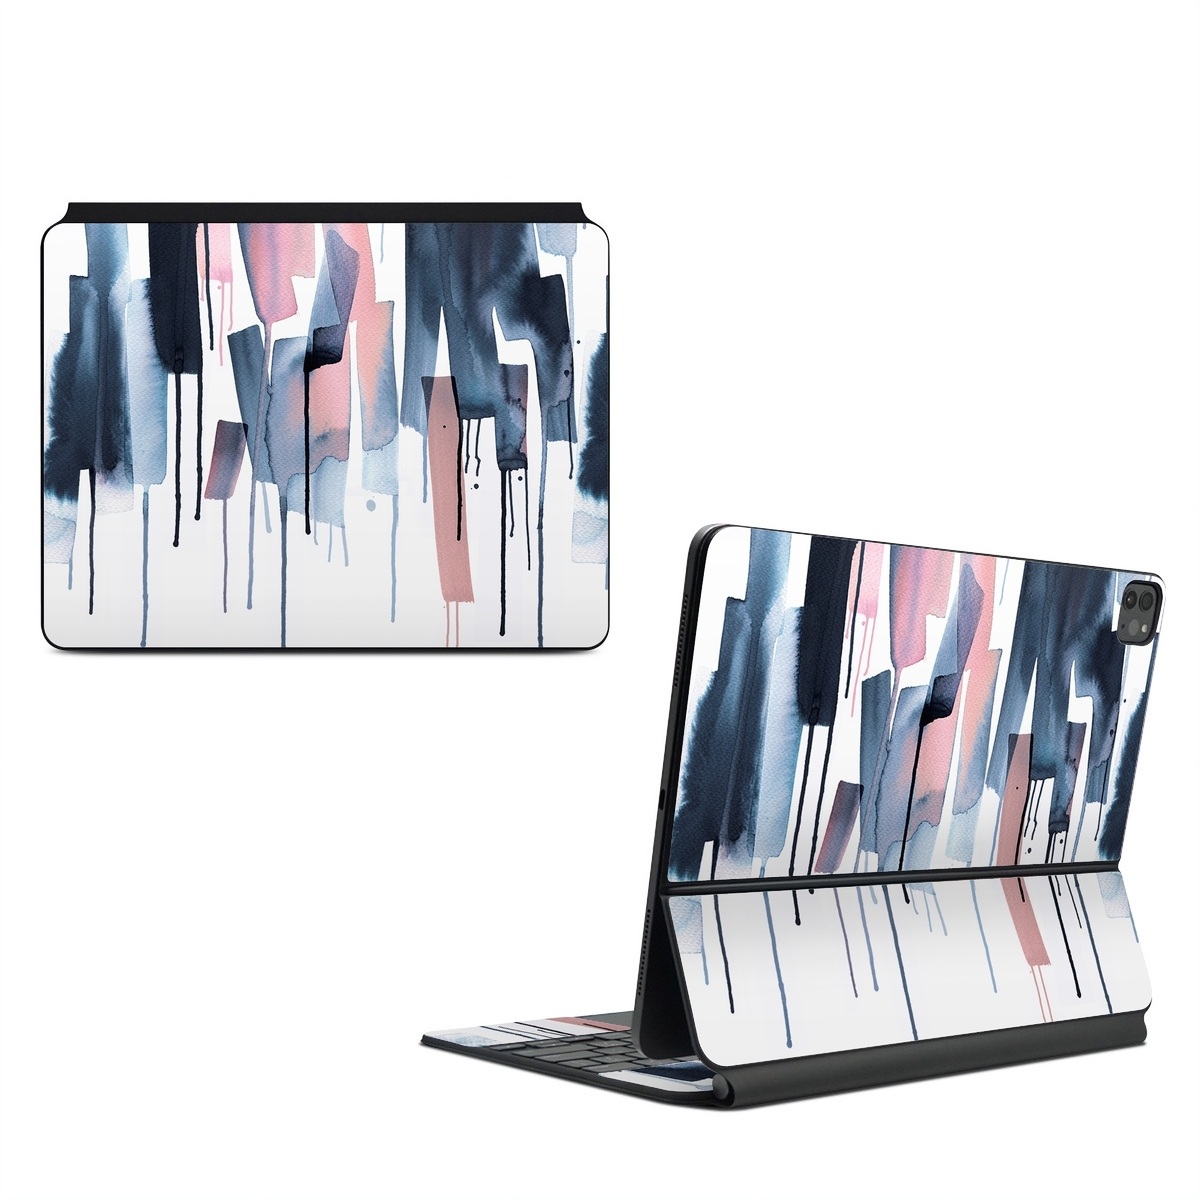 Magic Keyboard for iPad Series Skin design of Gesture, Snow, Art, Freezing, Material property, Font, Fashion design, Sportswear, Electric blue, Magenta, with white, blue, pink, black colors